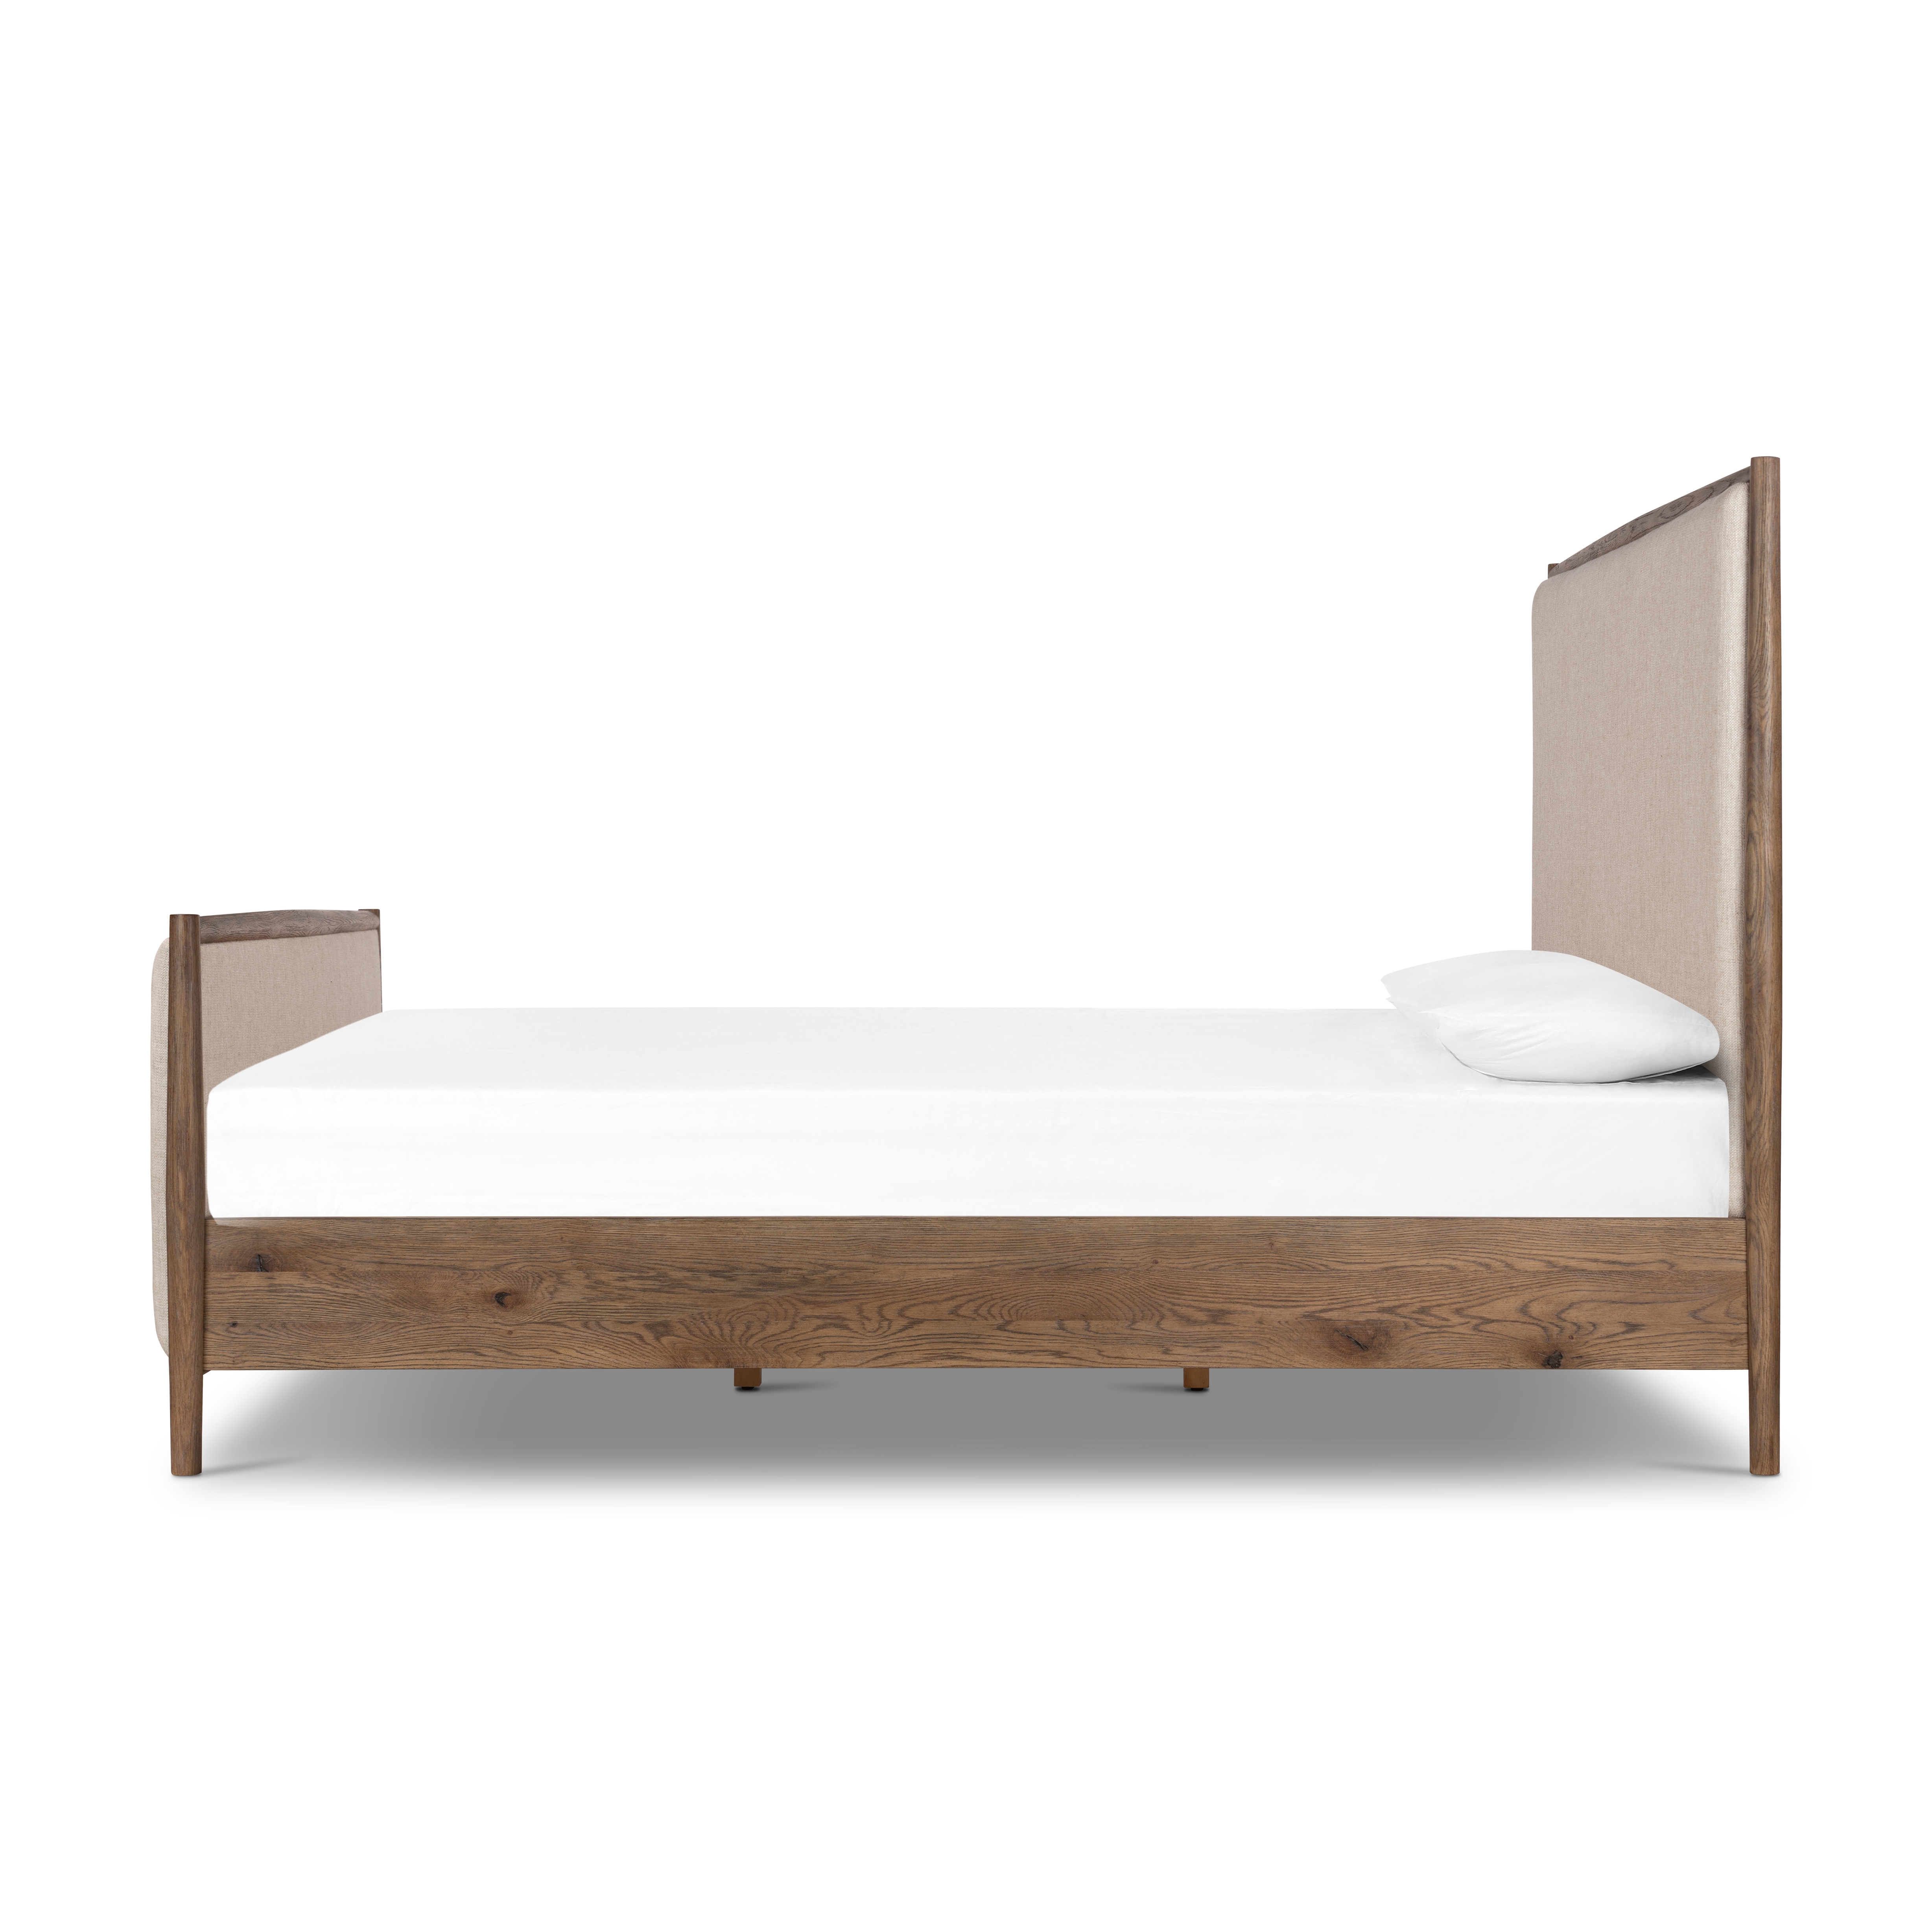 Glenview Bed-Weathered Oak-Queen - Image 4